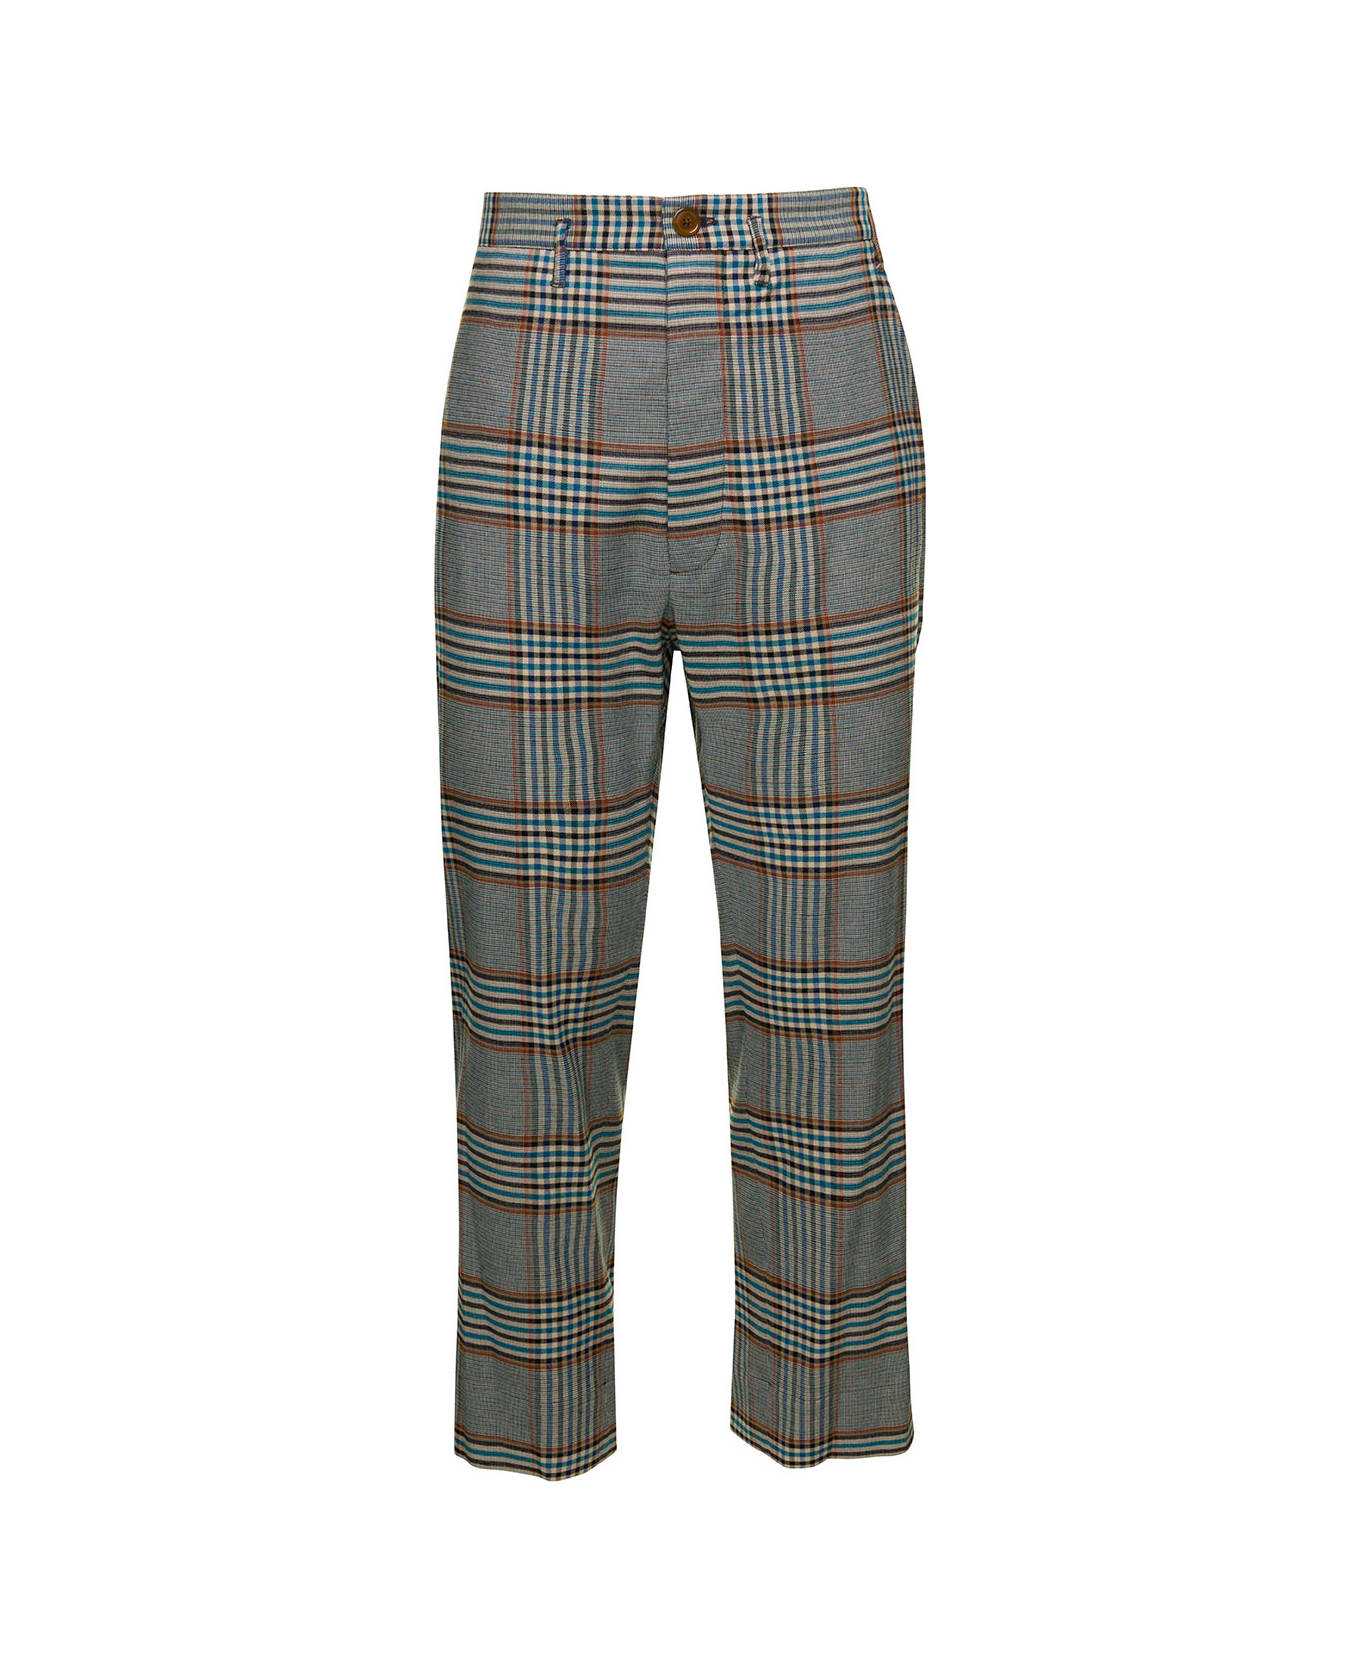 Vivienne Westwood Grey High-waisted Pants With Check Motif In Viscose And Wool Blend Man - Blu ボトムス